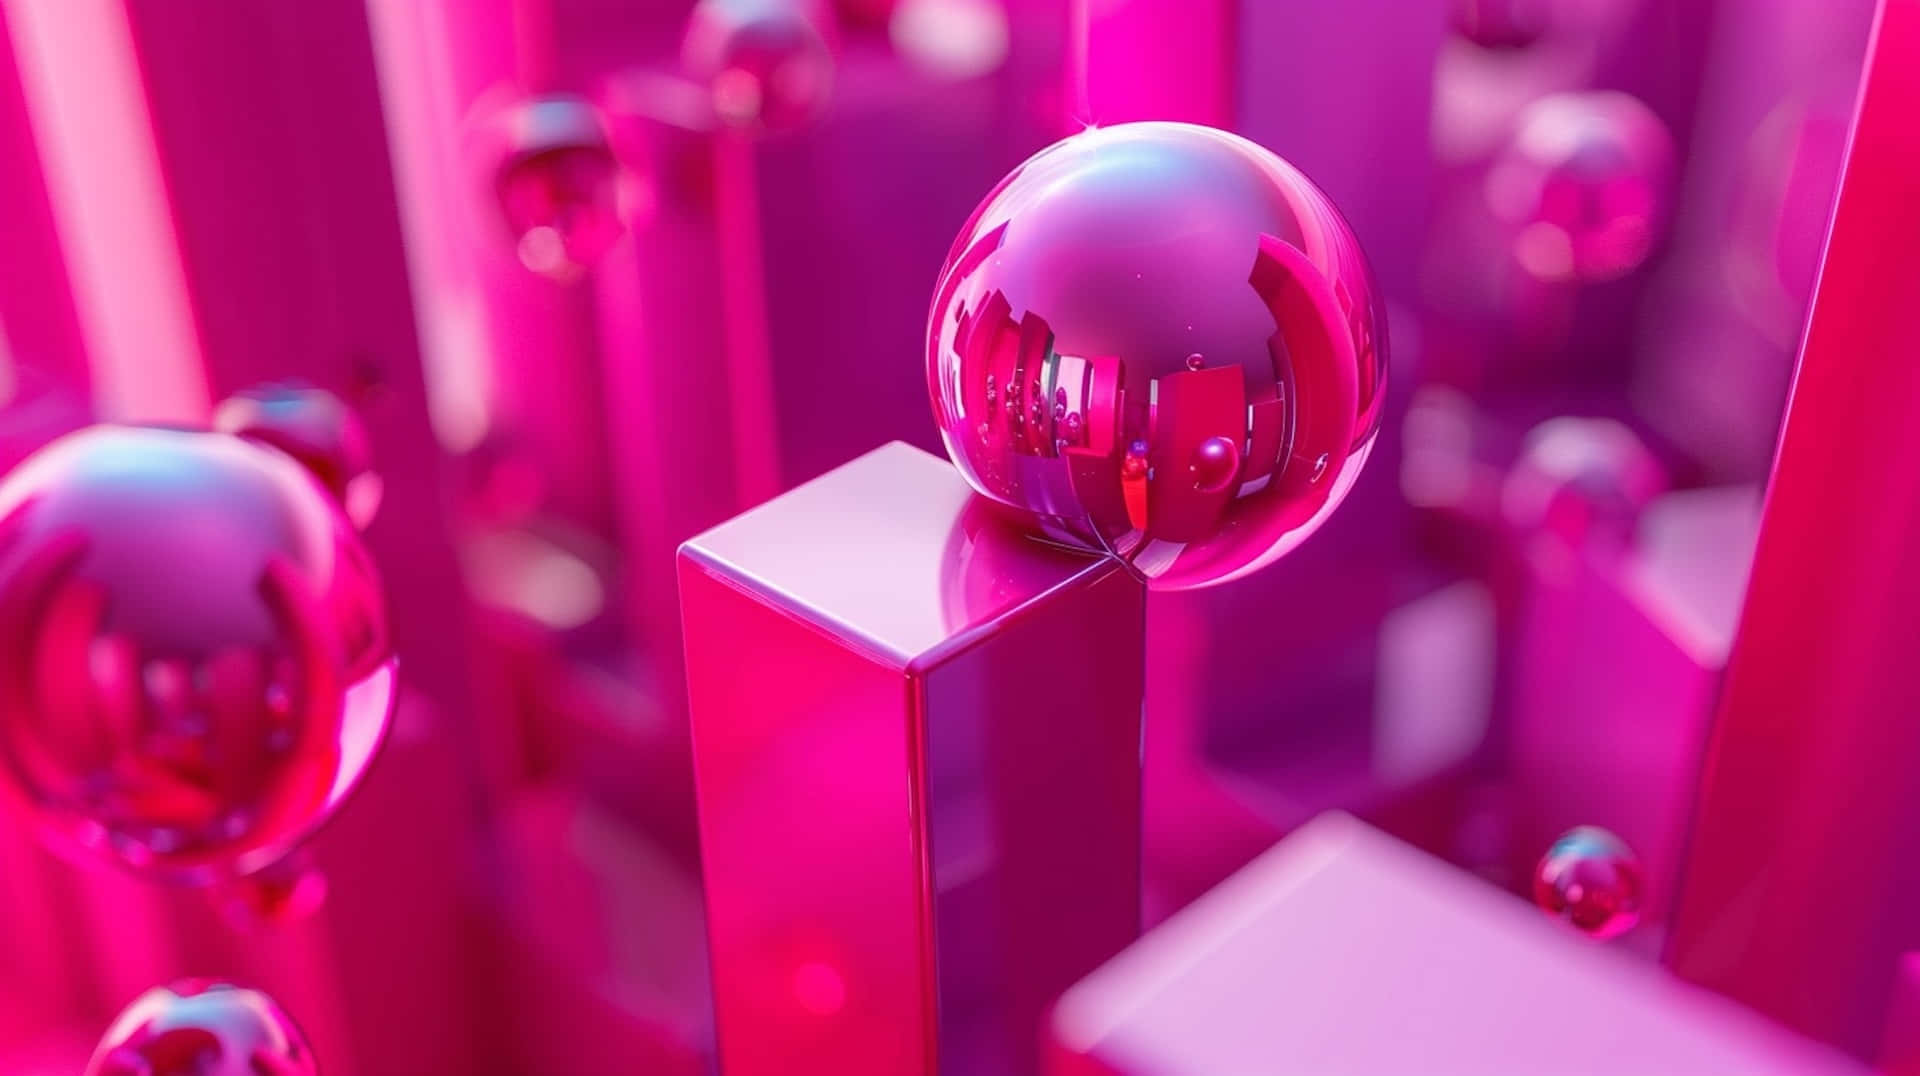 Pink3 D Geometric Landscapewith Spheres Wallpaper